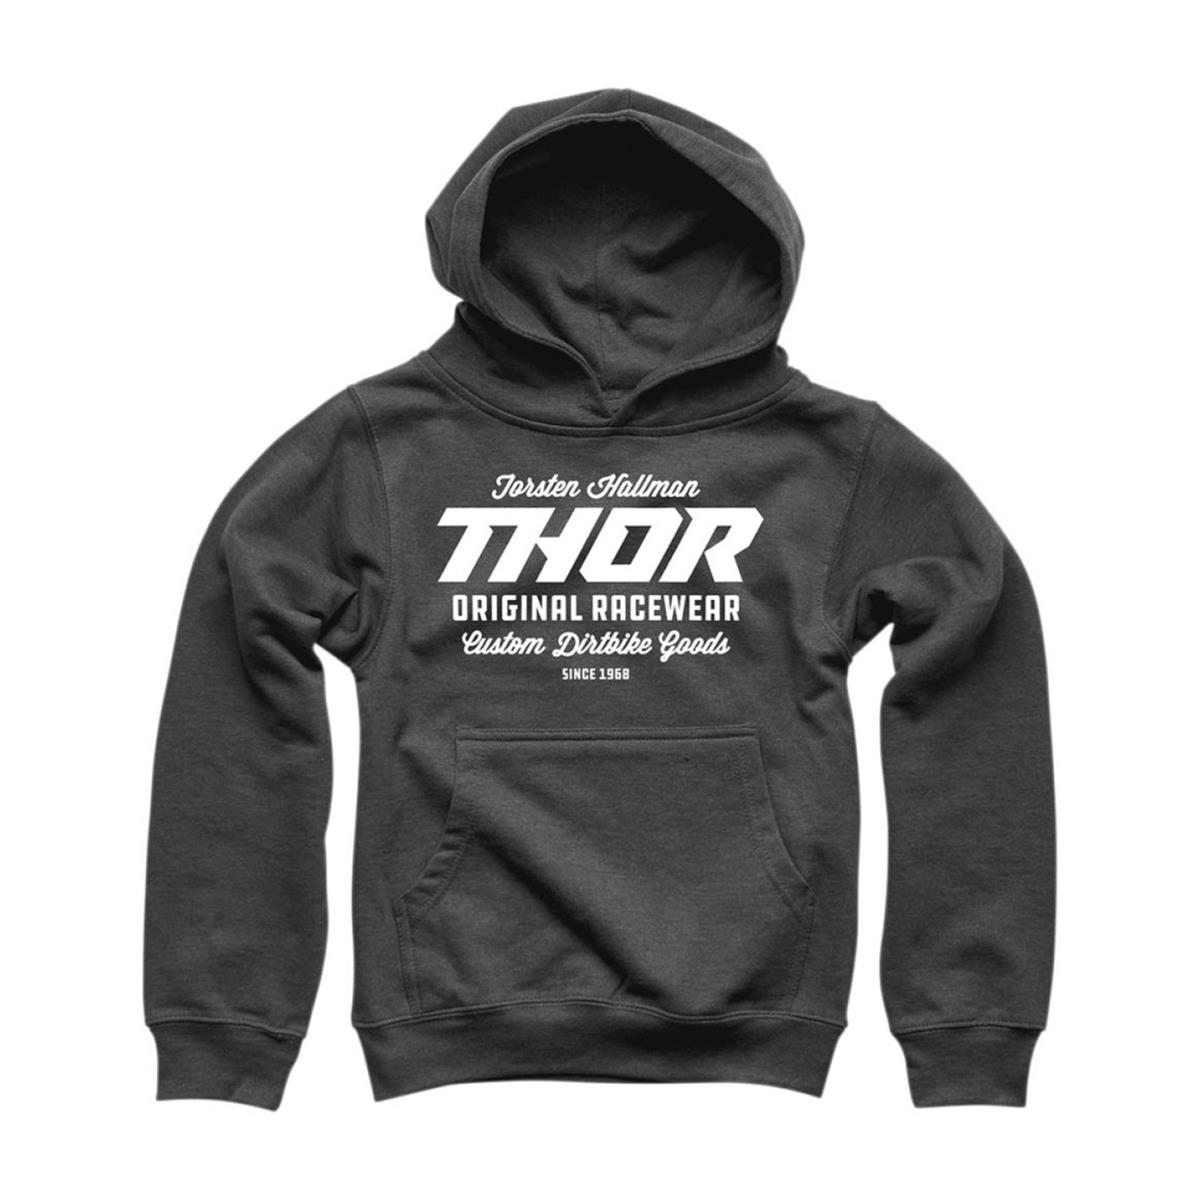 Thor Kids Hoody The Goods Charcoal